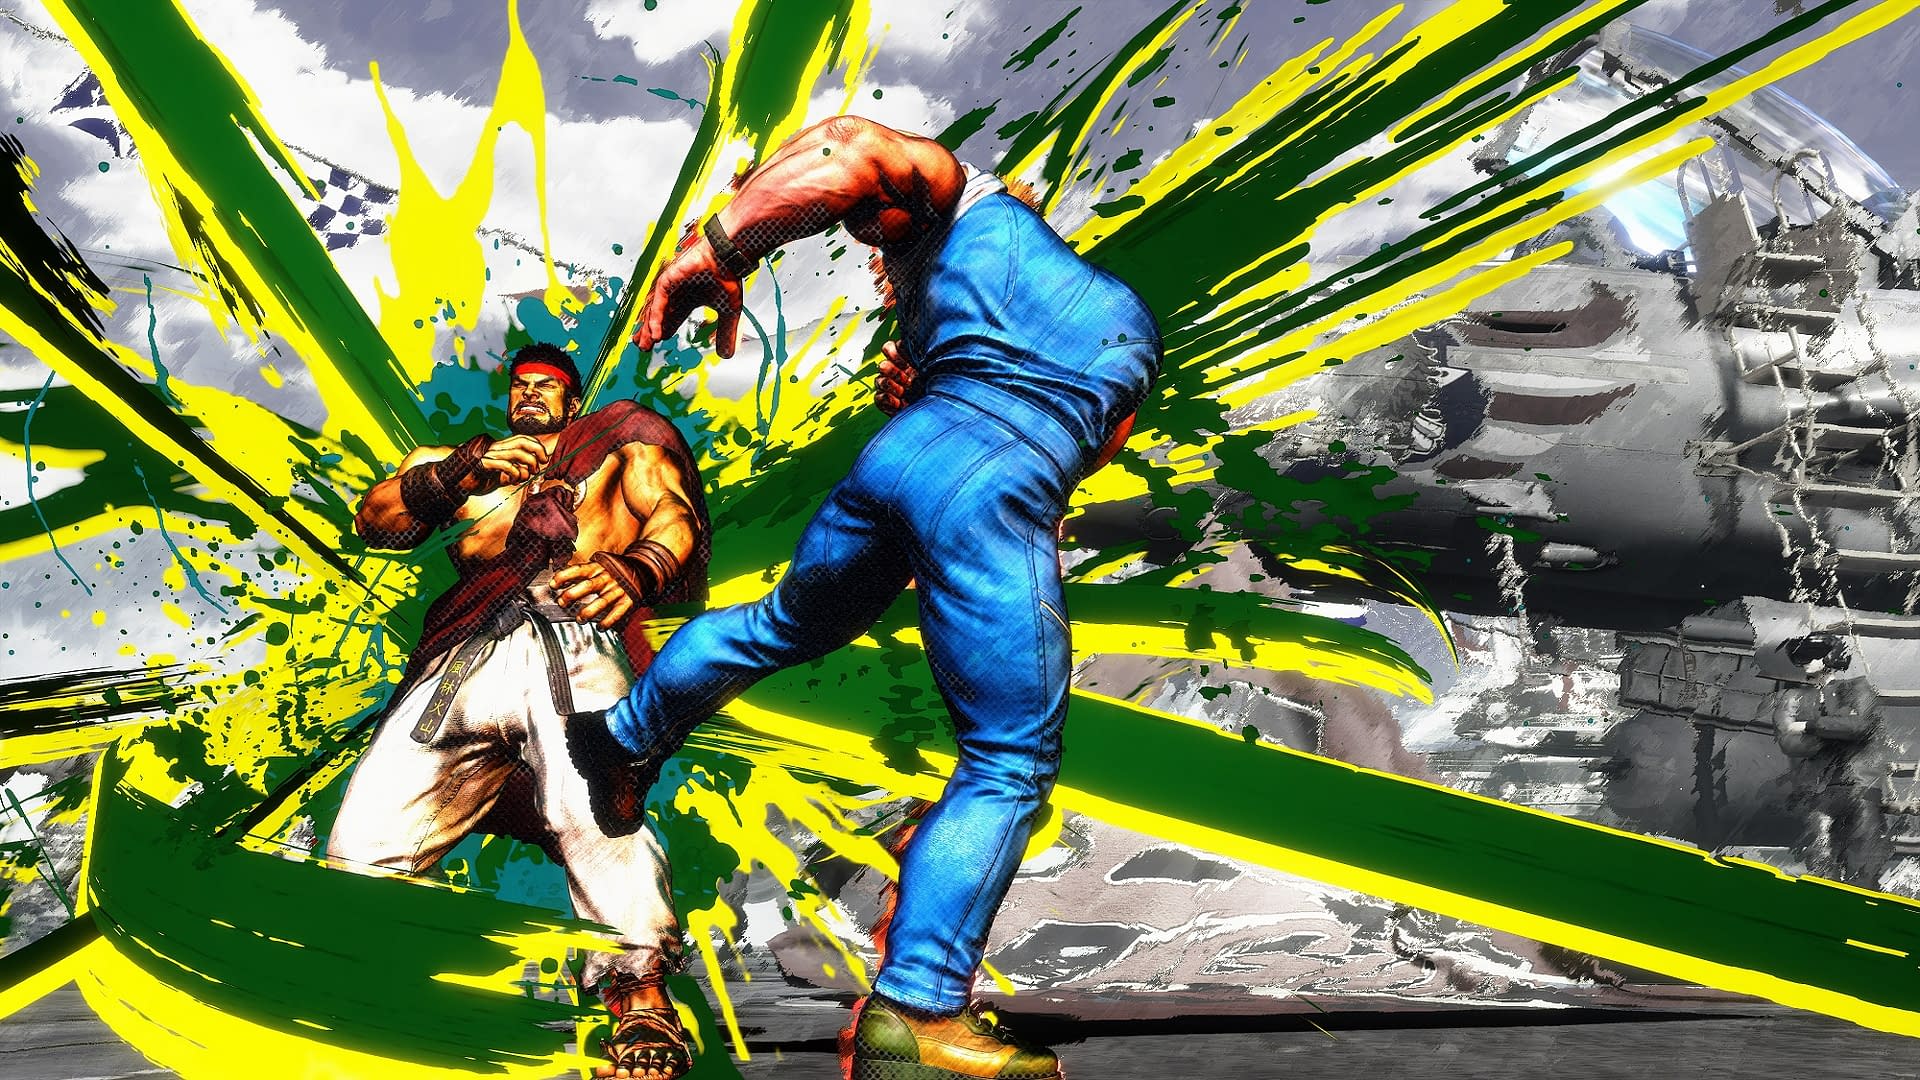 New 'Street Fighter 6' footage reveals Guile in action